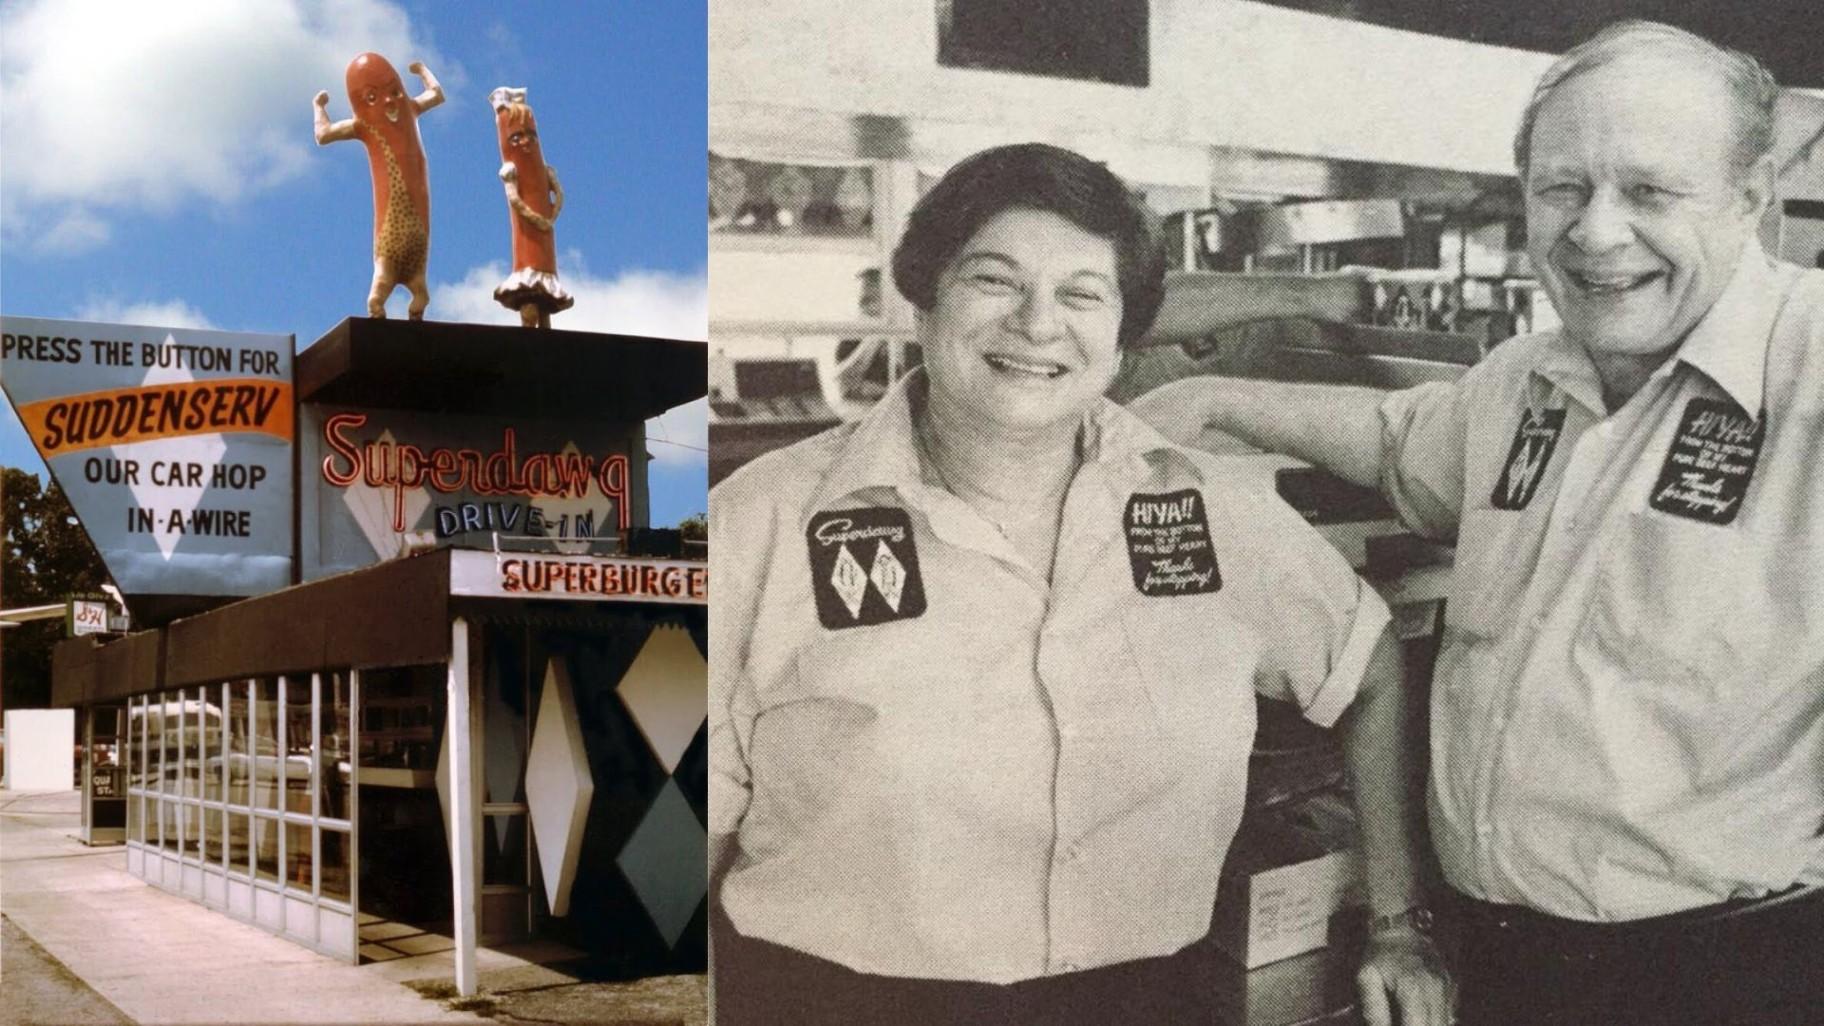 Customers placing an order at Superdawg Drive-In have received the same cheerful greeting since Maurie and Flaurie Berman opened the restaurant in 1948. (Courtesy of Superdawg)